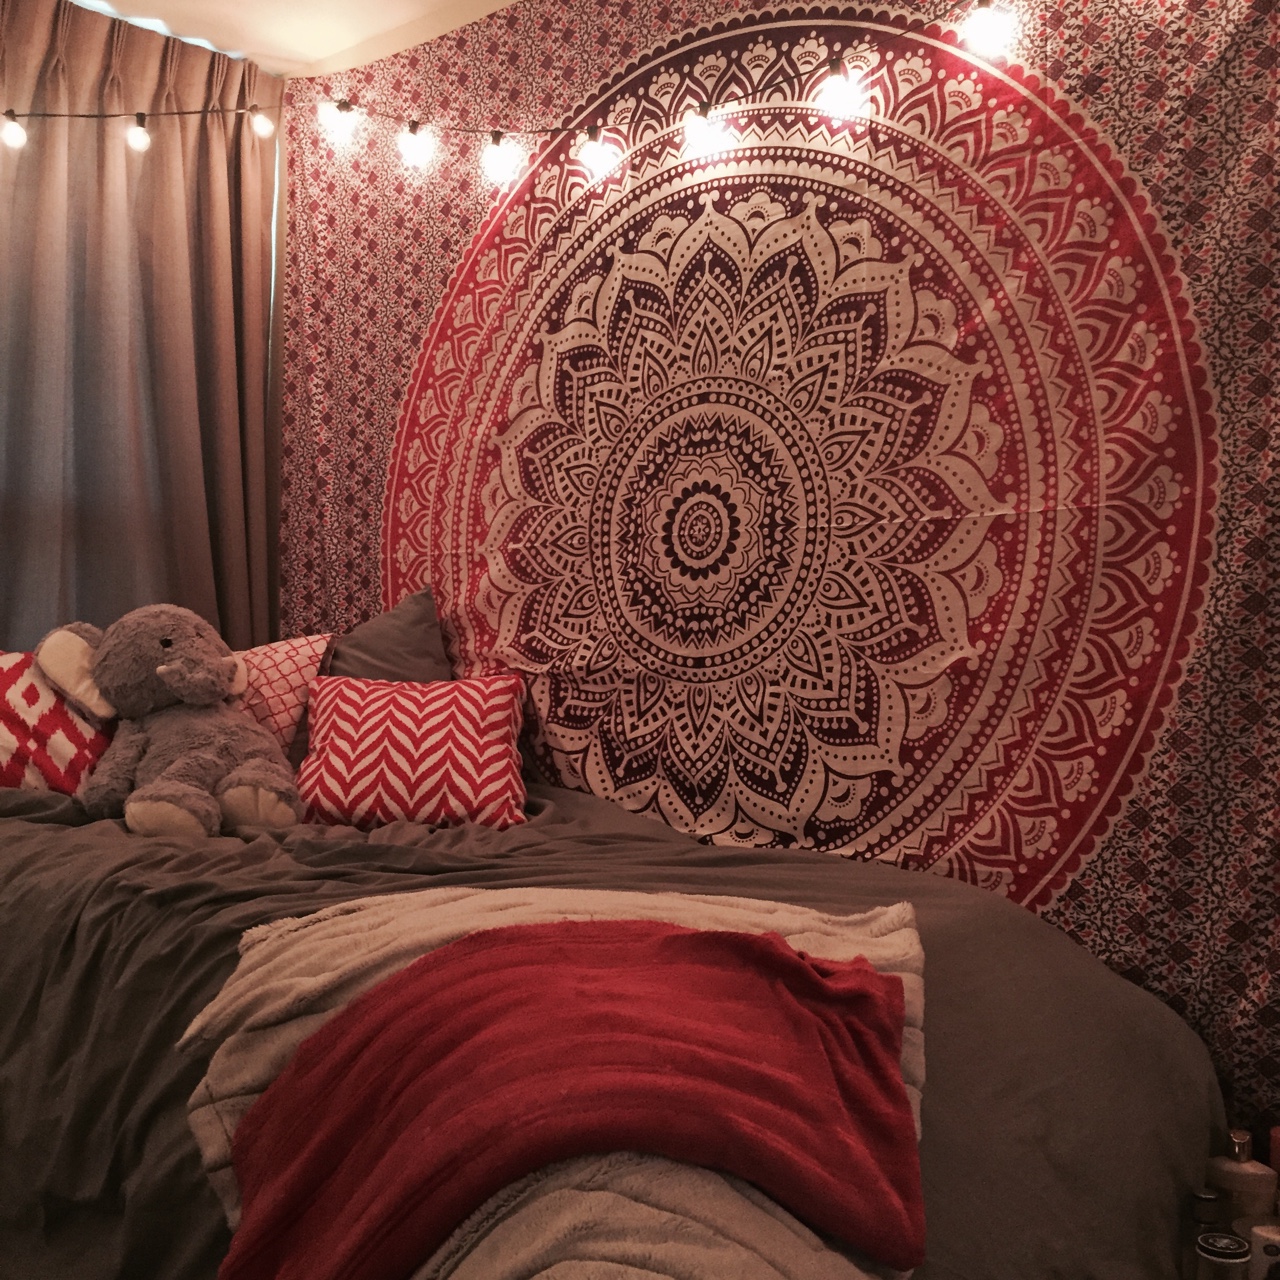 Maroon Floral Ombre Mandala Wall Tapestry Bedding, Beach Throw